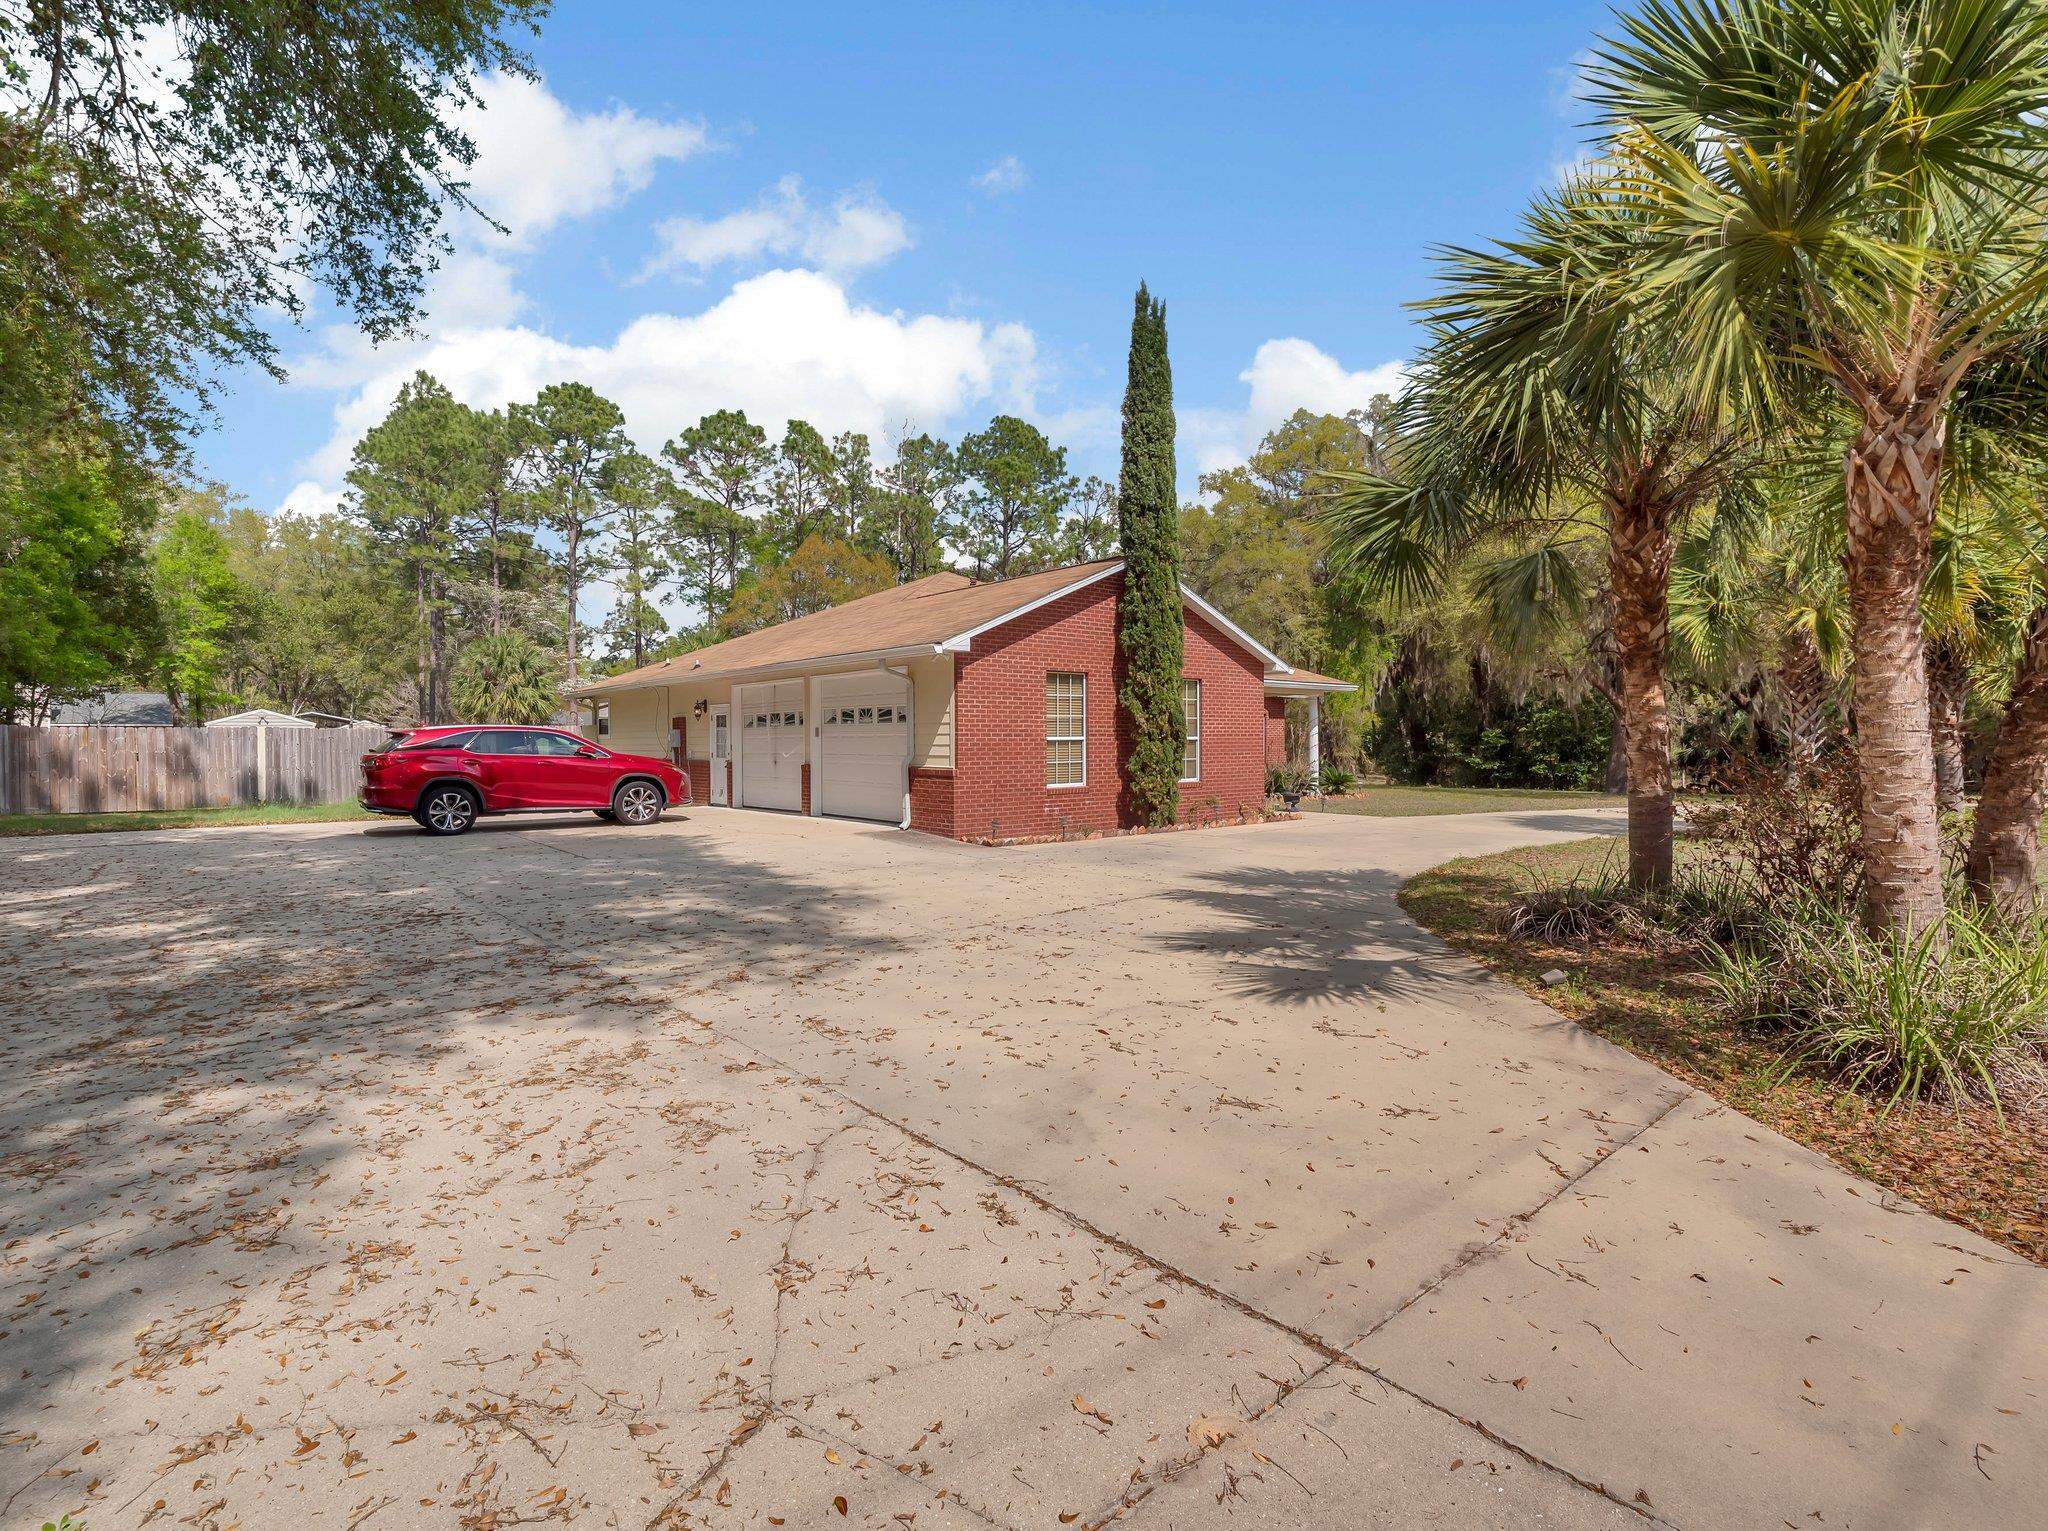 110 Judson Drive,PERRY,Florida 32348,3 Bedrooms Bedrooms,2 BathroomsBathrooms,Detached single family,110 Judson Drive,365486